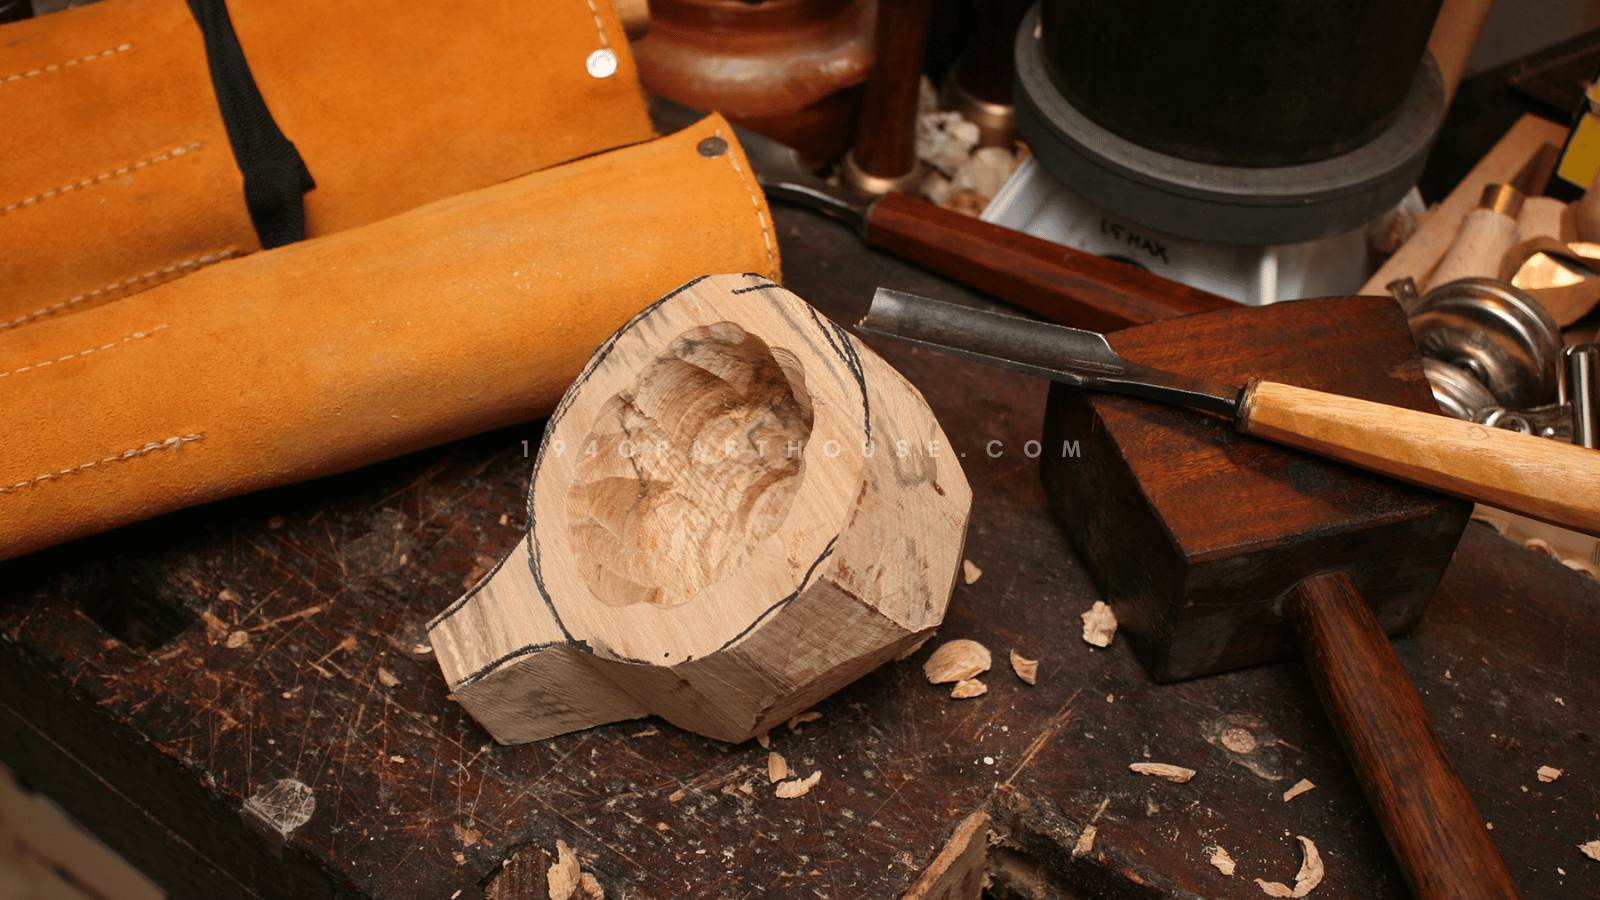 How to make a Kuksa cup step by step - Step 4: Hollow Out the Interior